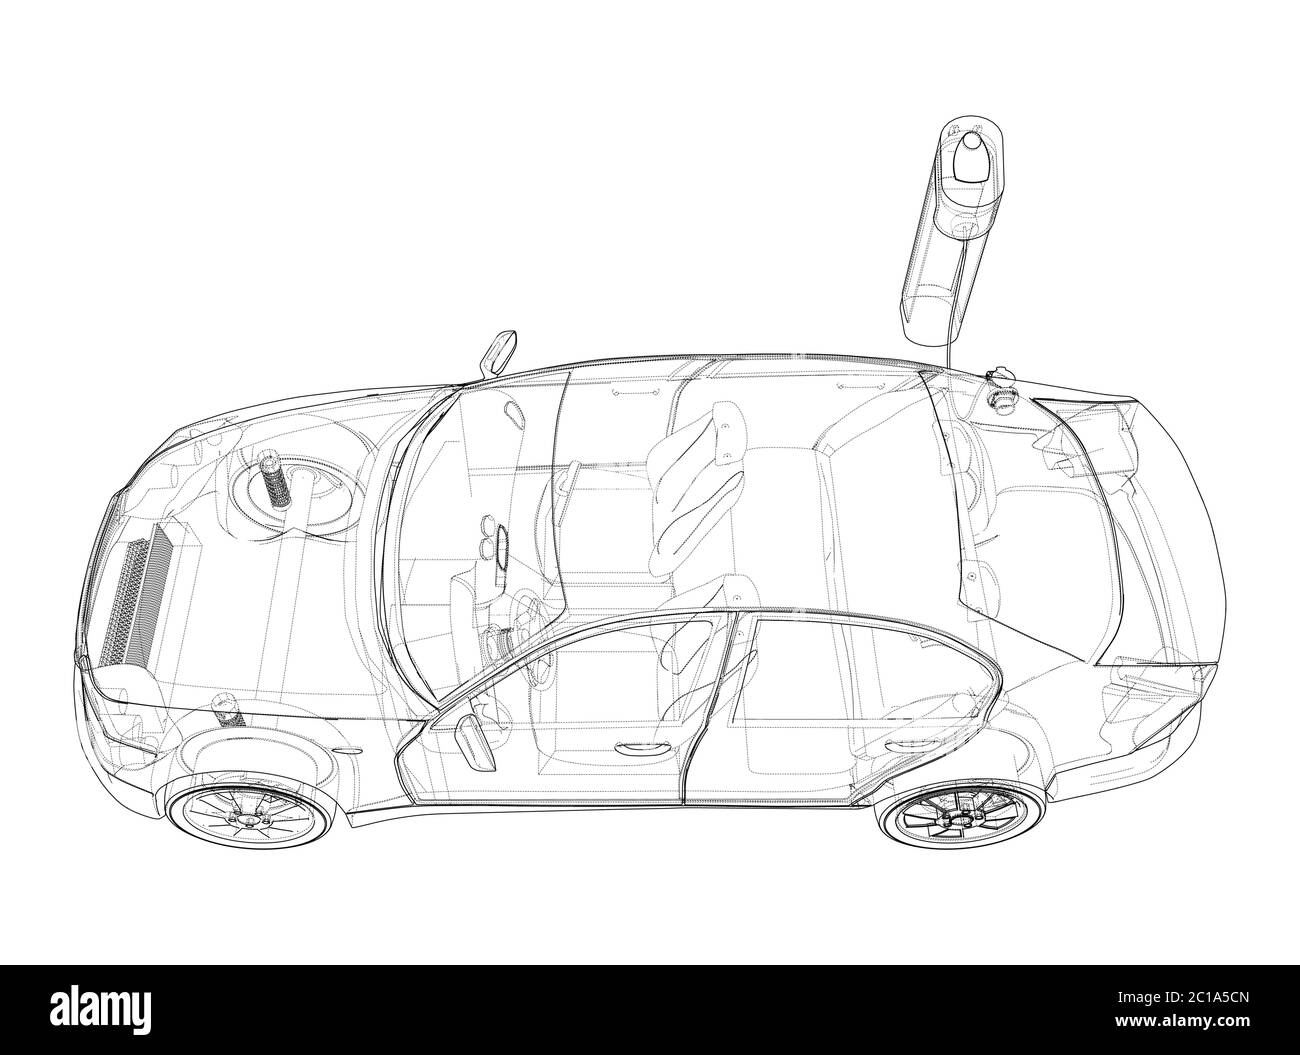 Electric Vehicle Charging Station Sketch. Vector Stock Vector Image ...